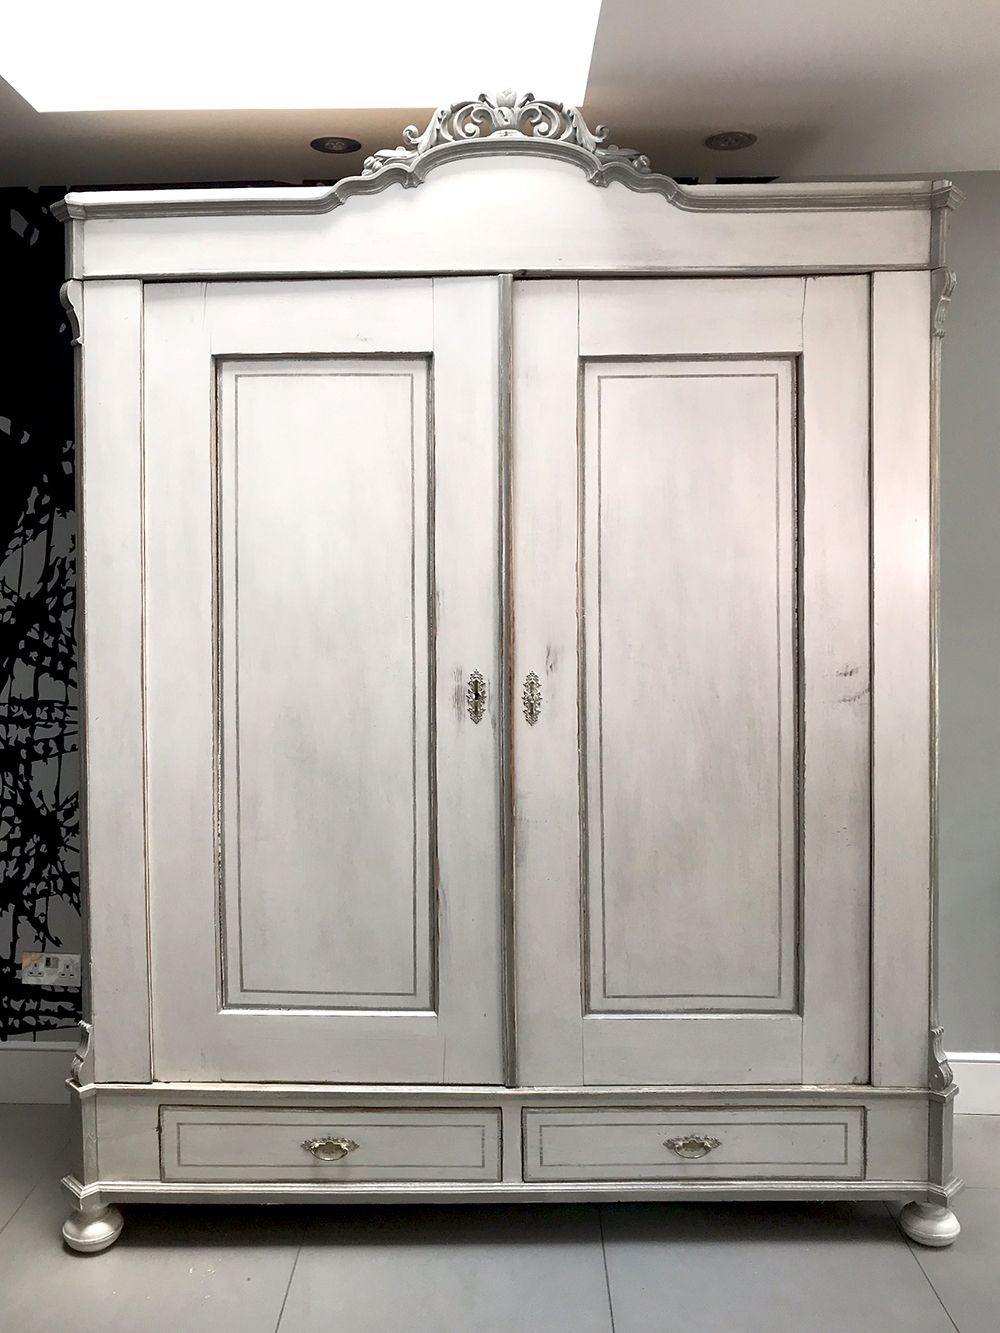 Antique French Painted Armoire – Sold | Napoleonrockefeller – Vintage And  Retro Furniture, Bespoke Hand Crafted Chairs And Seating In White Vintage Wardrobes (View 13 of 20)